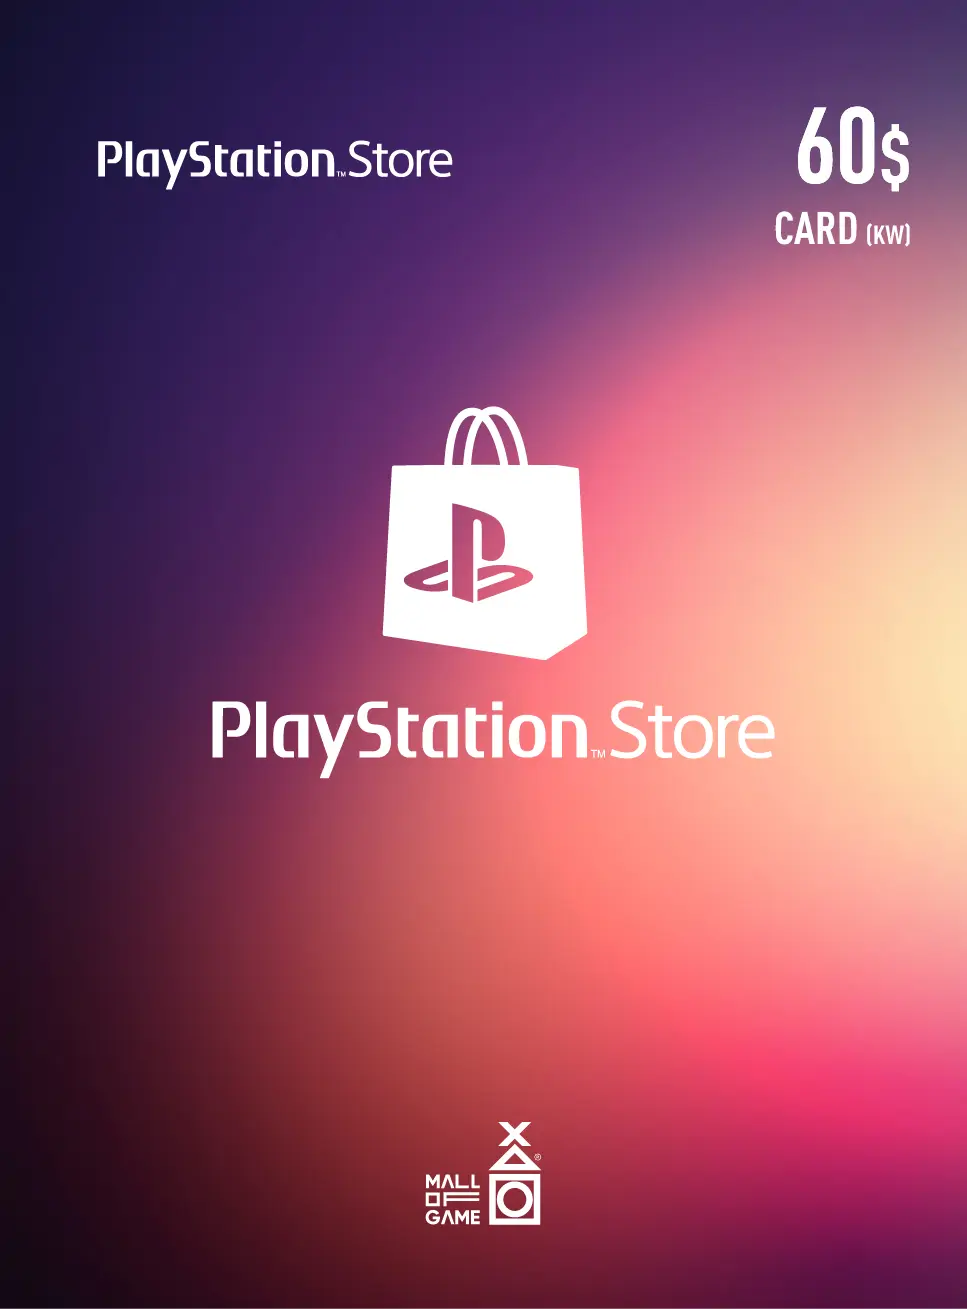 PlayStation™Store USD60 Gift Cards (KW)